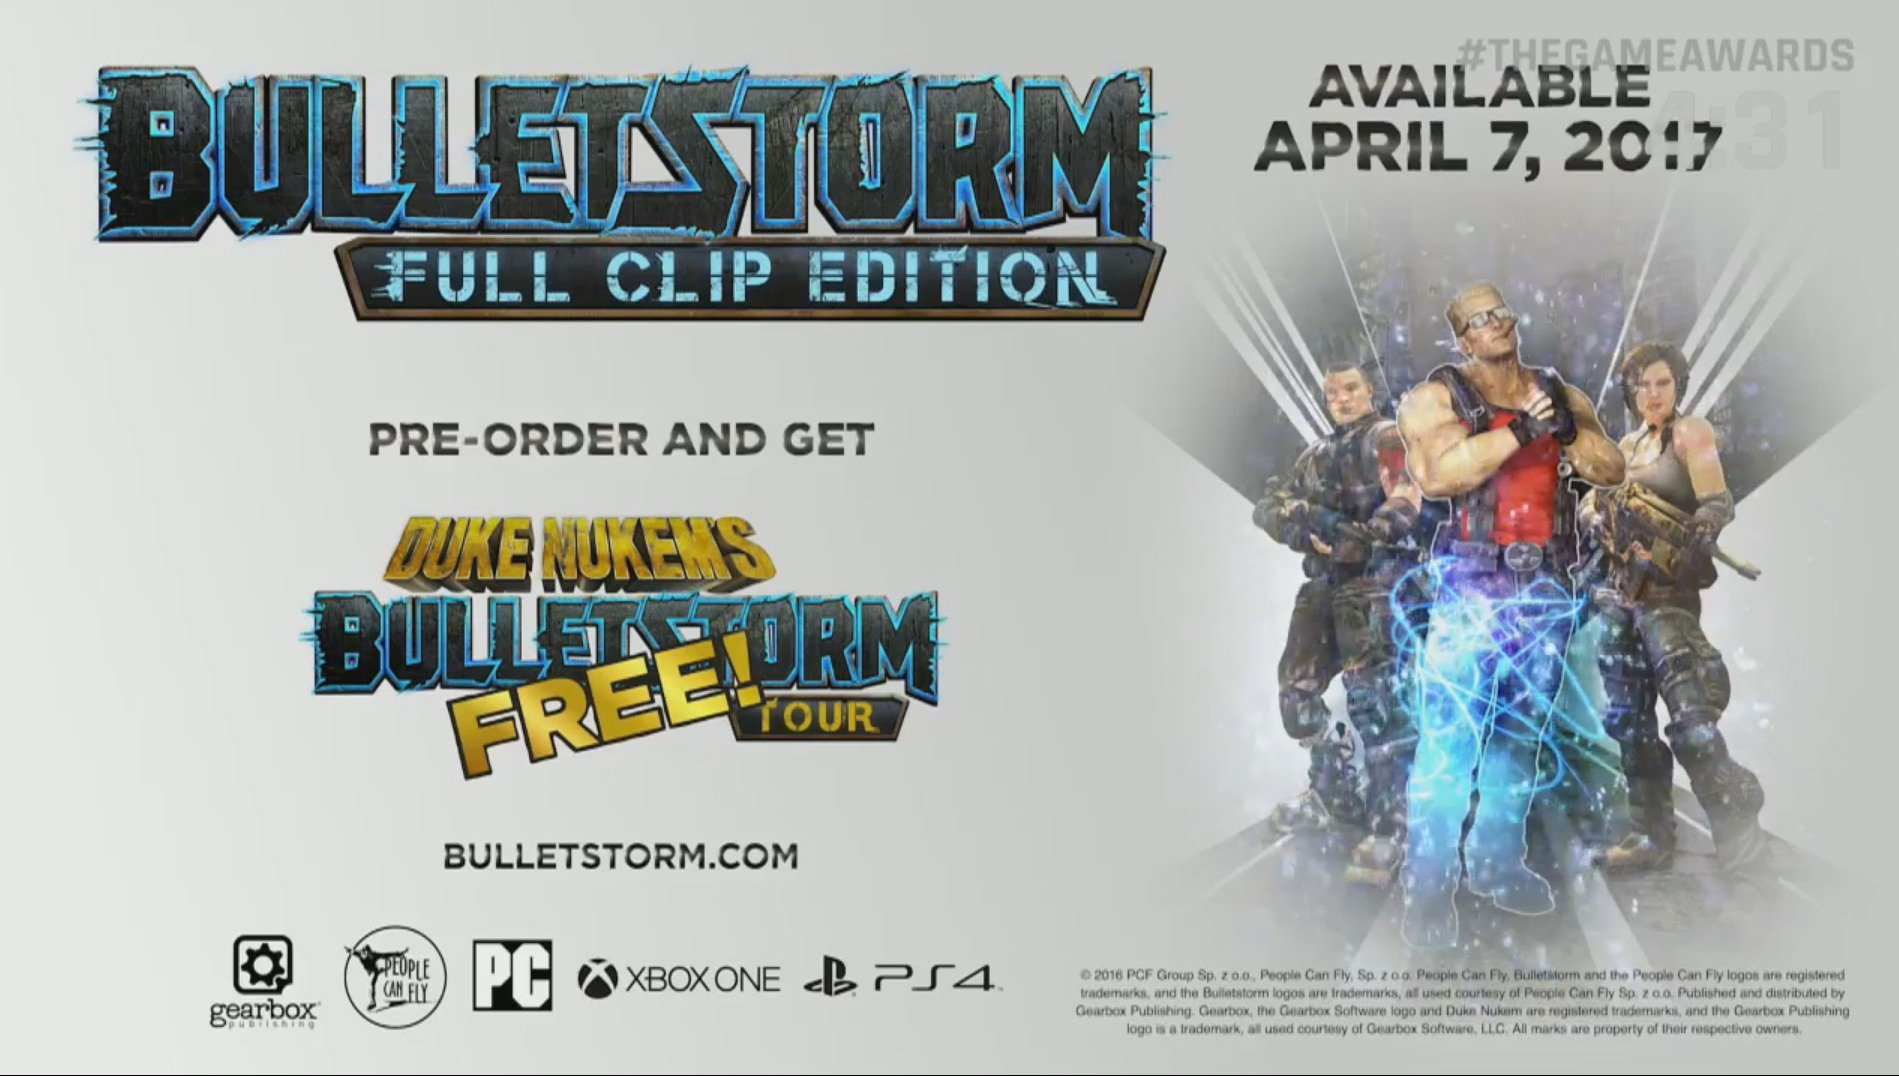 Bulletstorm: Full Clip Edition Revealed for PC, PS4, and Xbox One